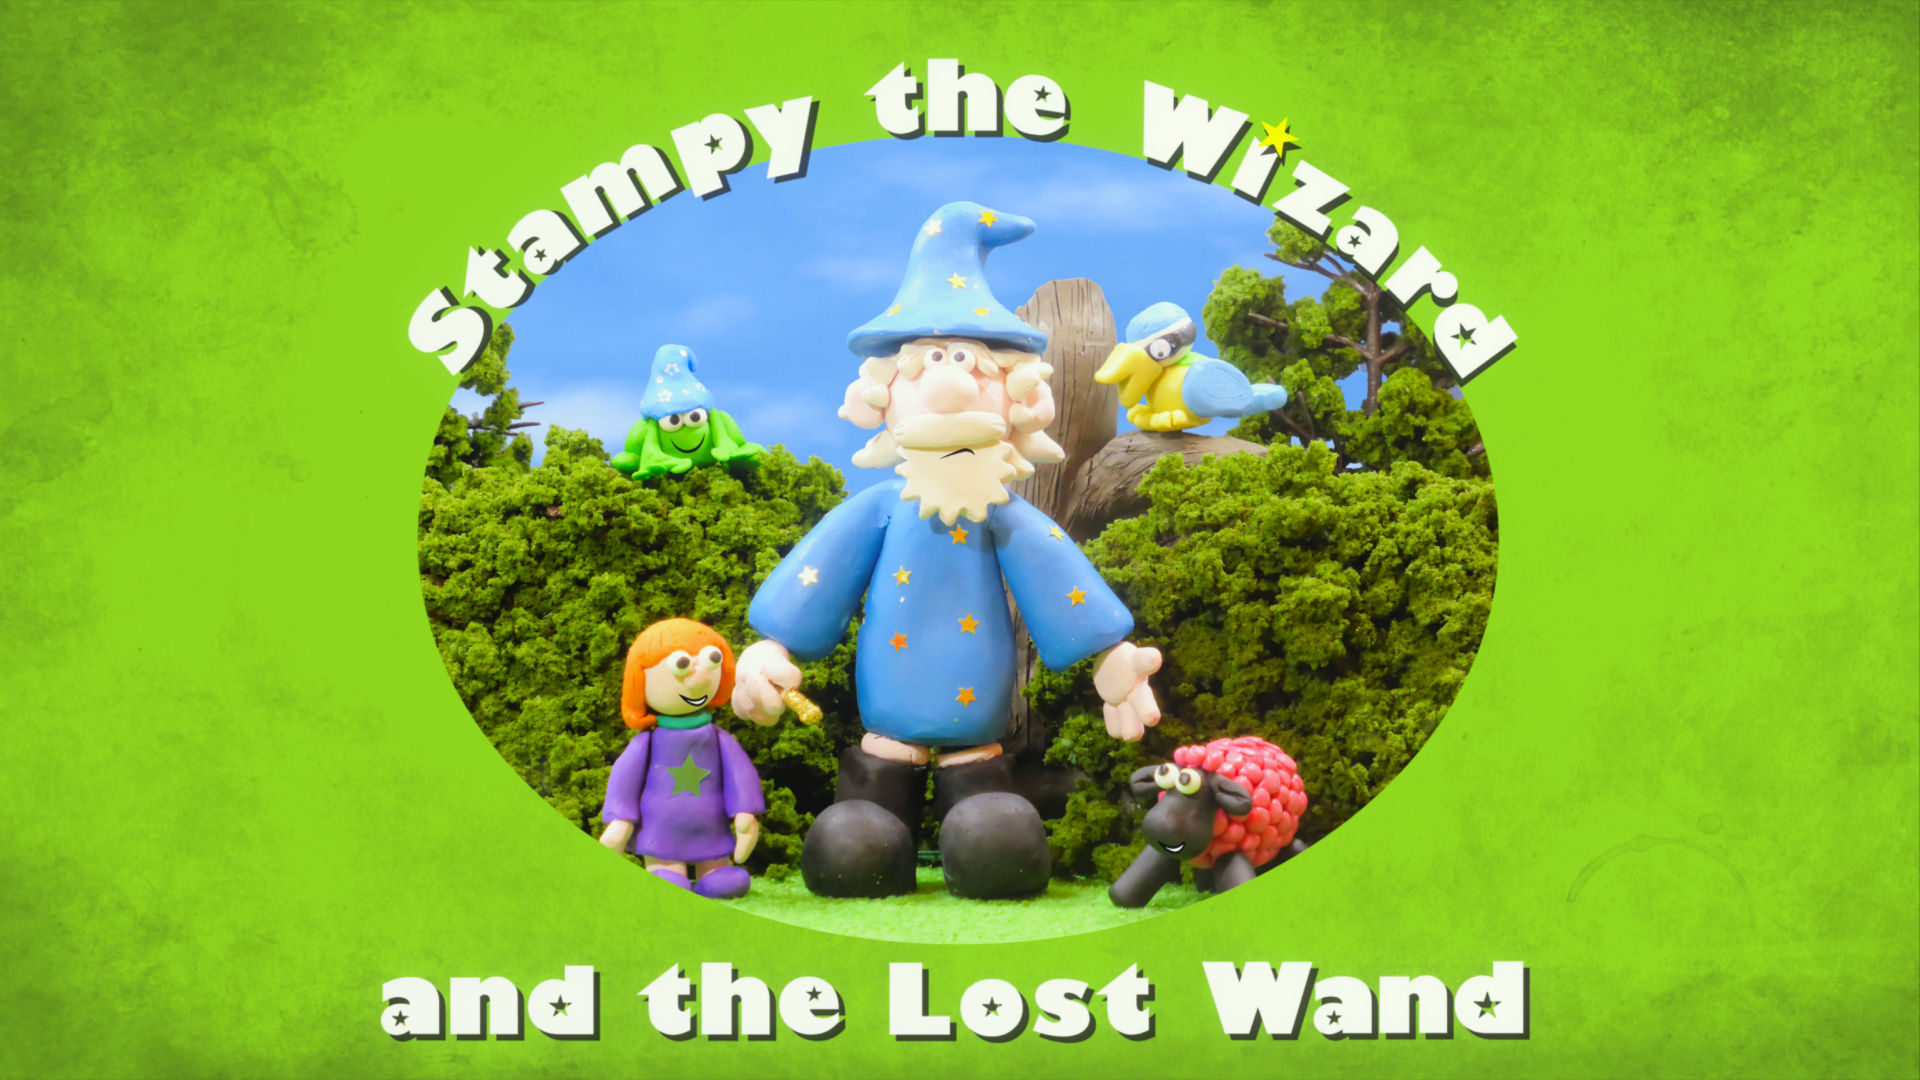 Stampy The Wizard Blends Old Skool Plasticine Models With Newfangled Smartphone Wizardry